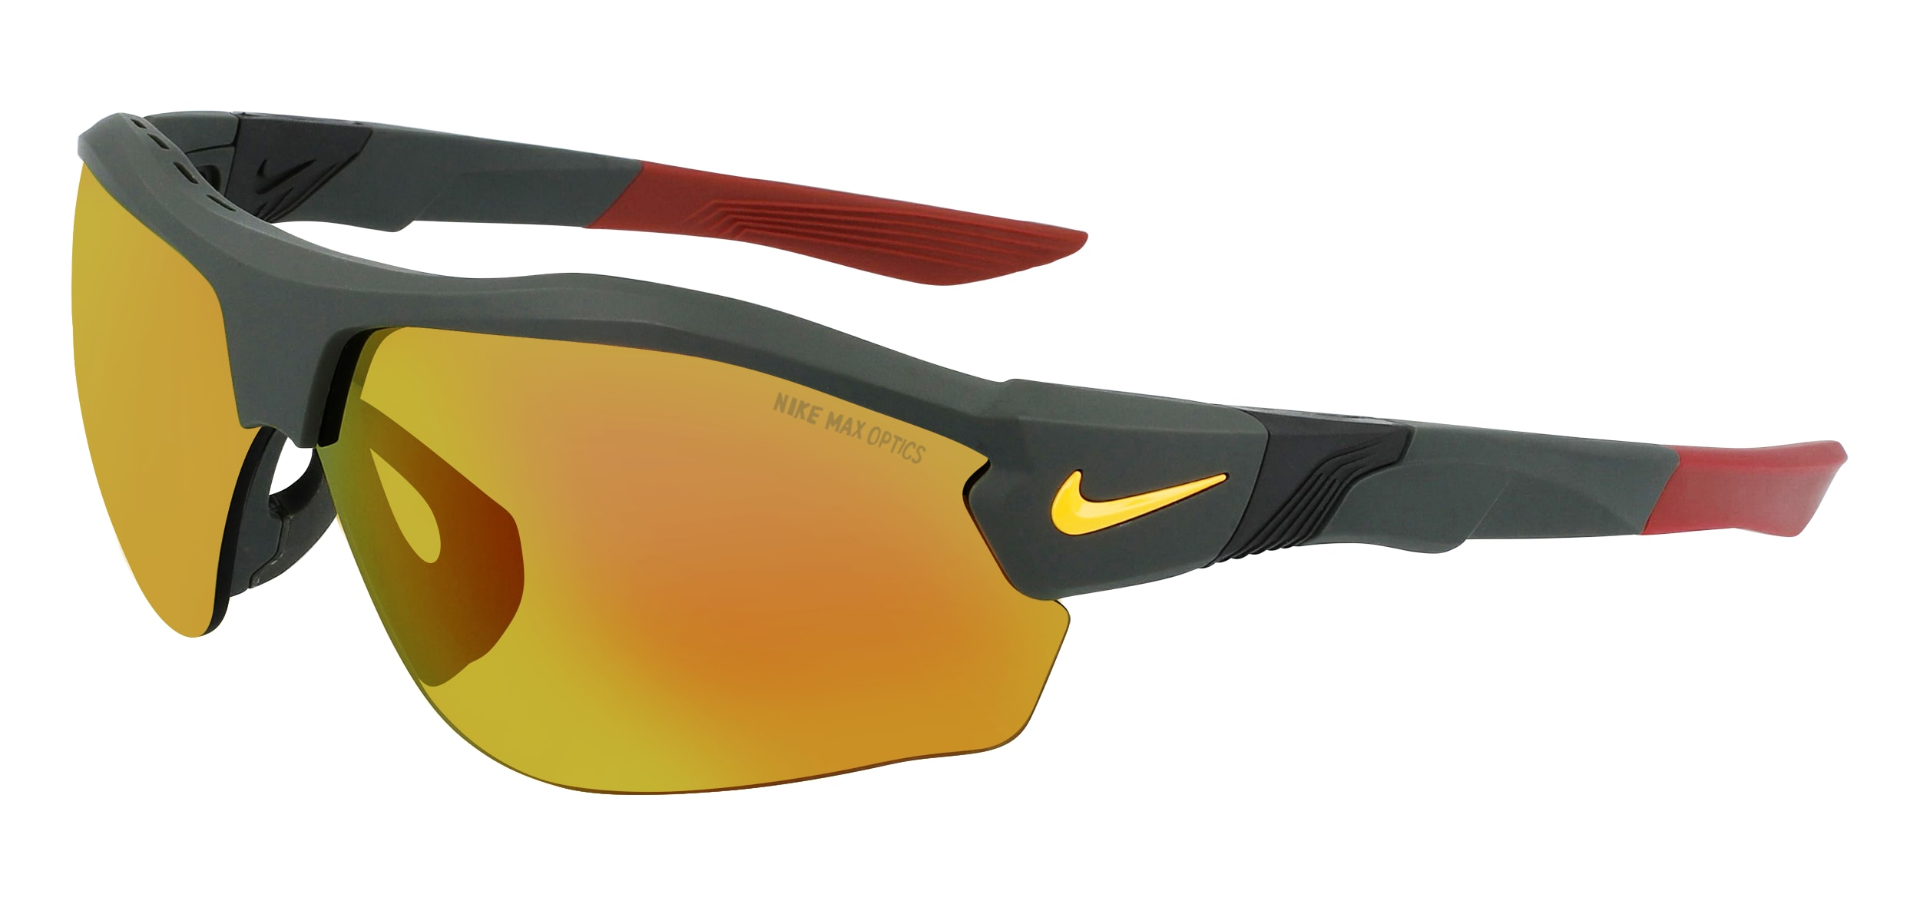 nike show x3 baseball sunglasses with interchangeable lenses in matte sequoia with grey orange lenses